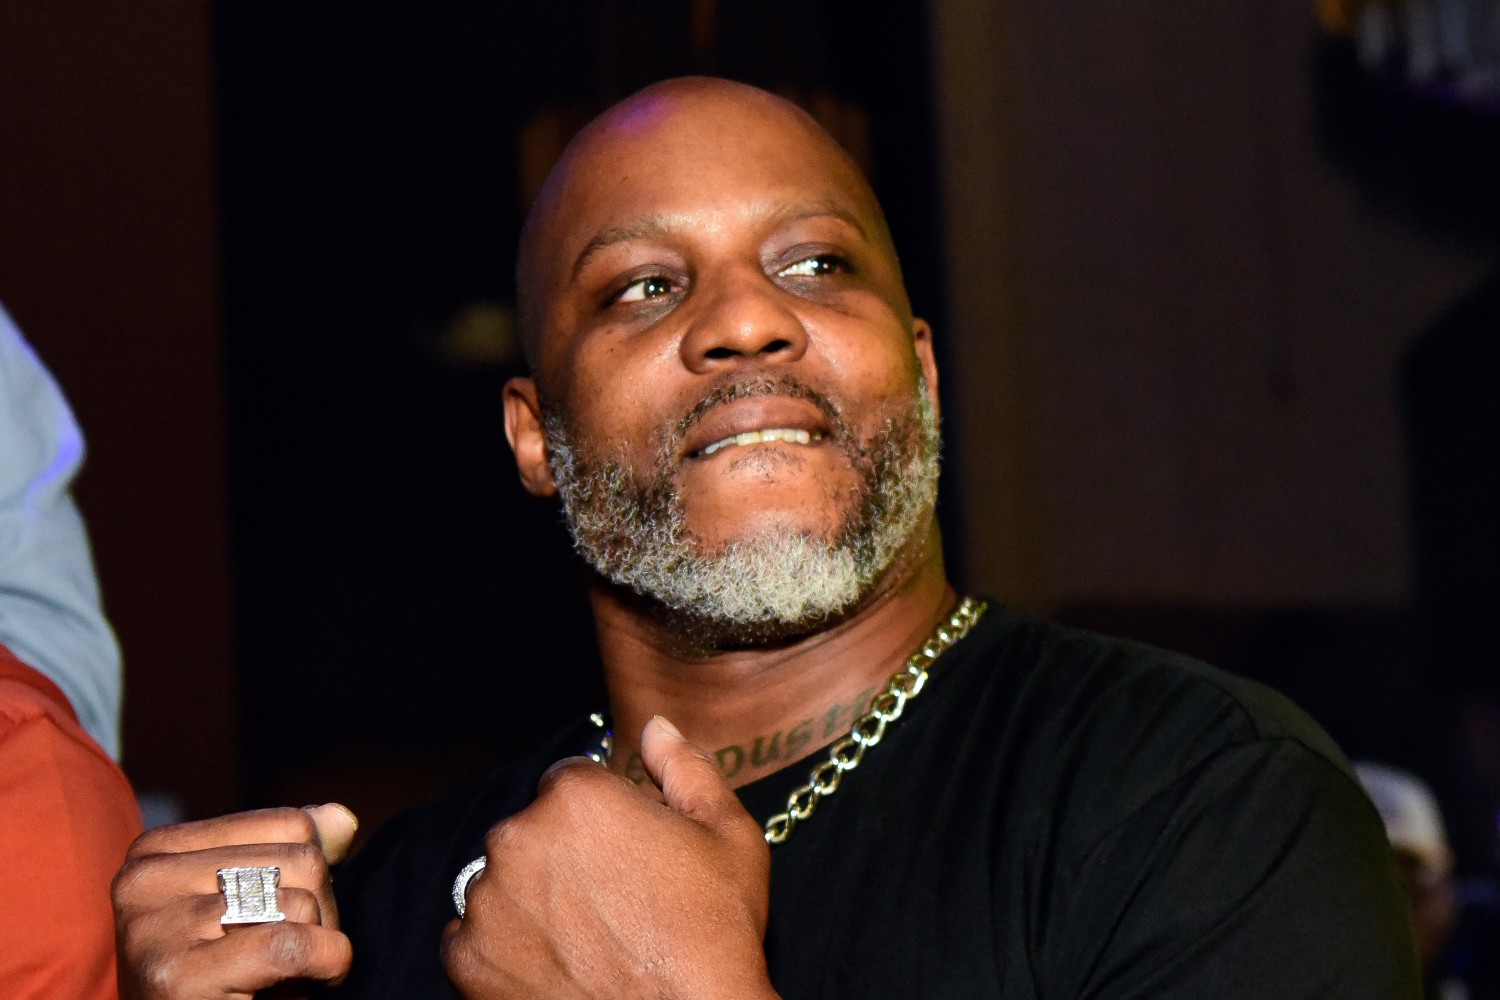 DMX remains on life support after heart attack, lawyer says